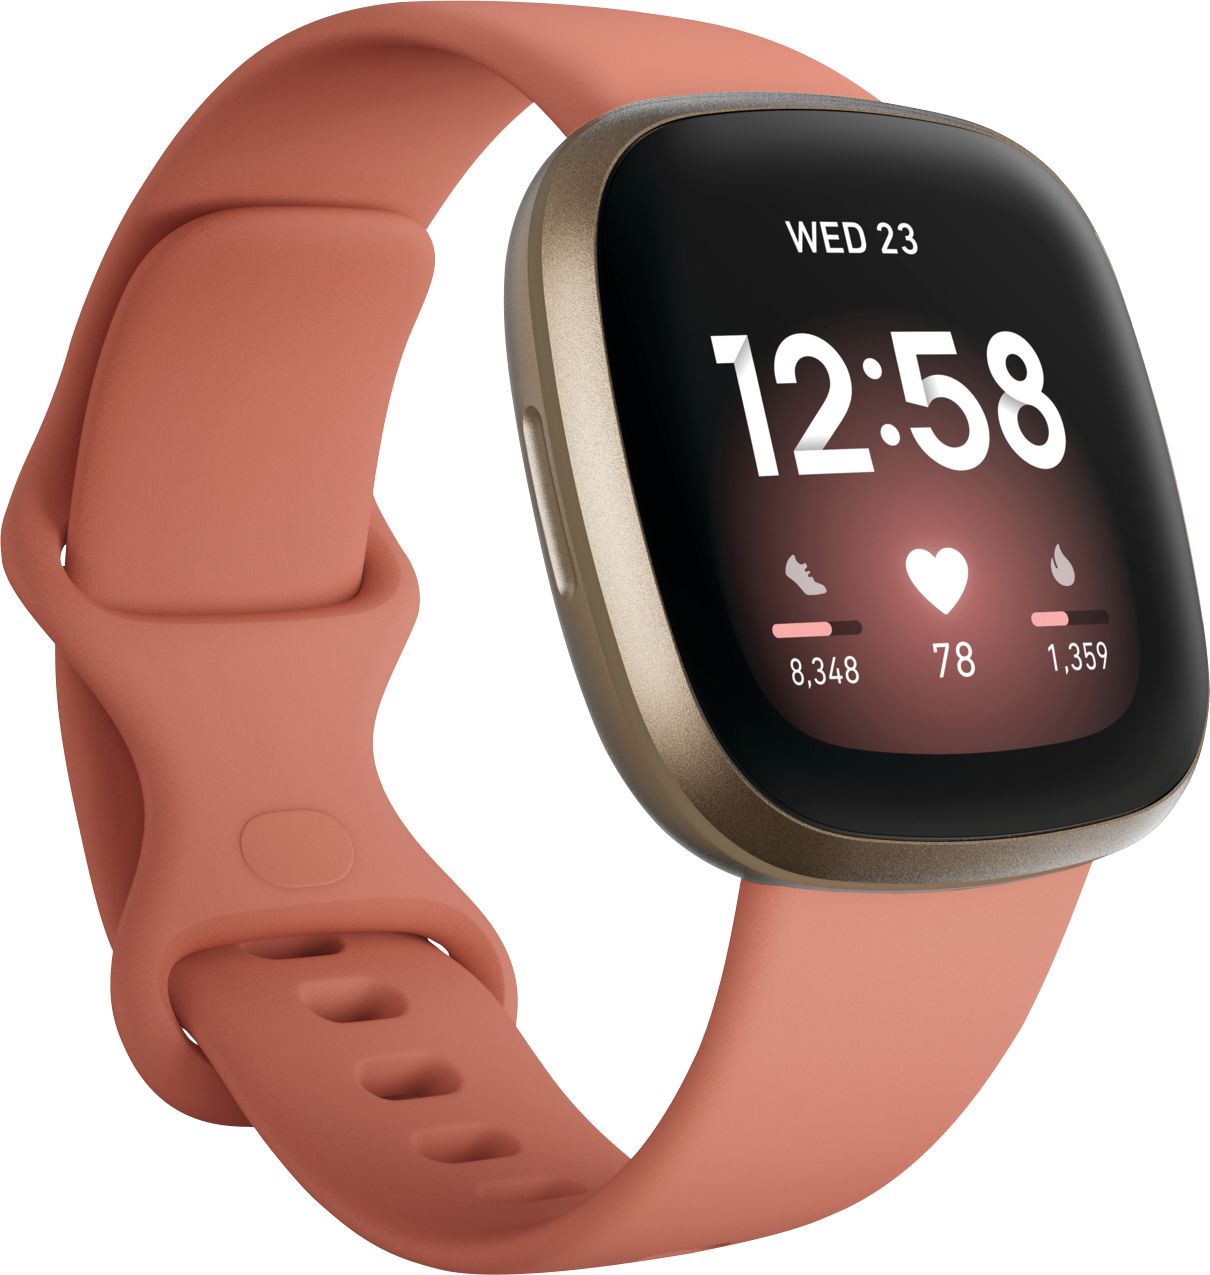 Angle View: Fitbit - Versa 3 Health & Fitness Smartwatch - Soft Gold